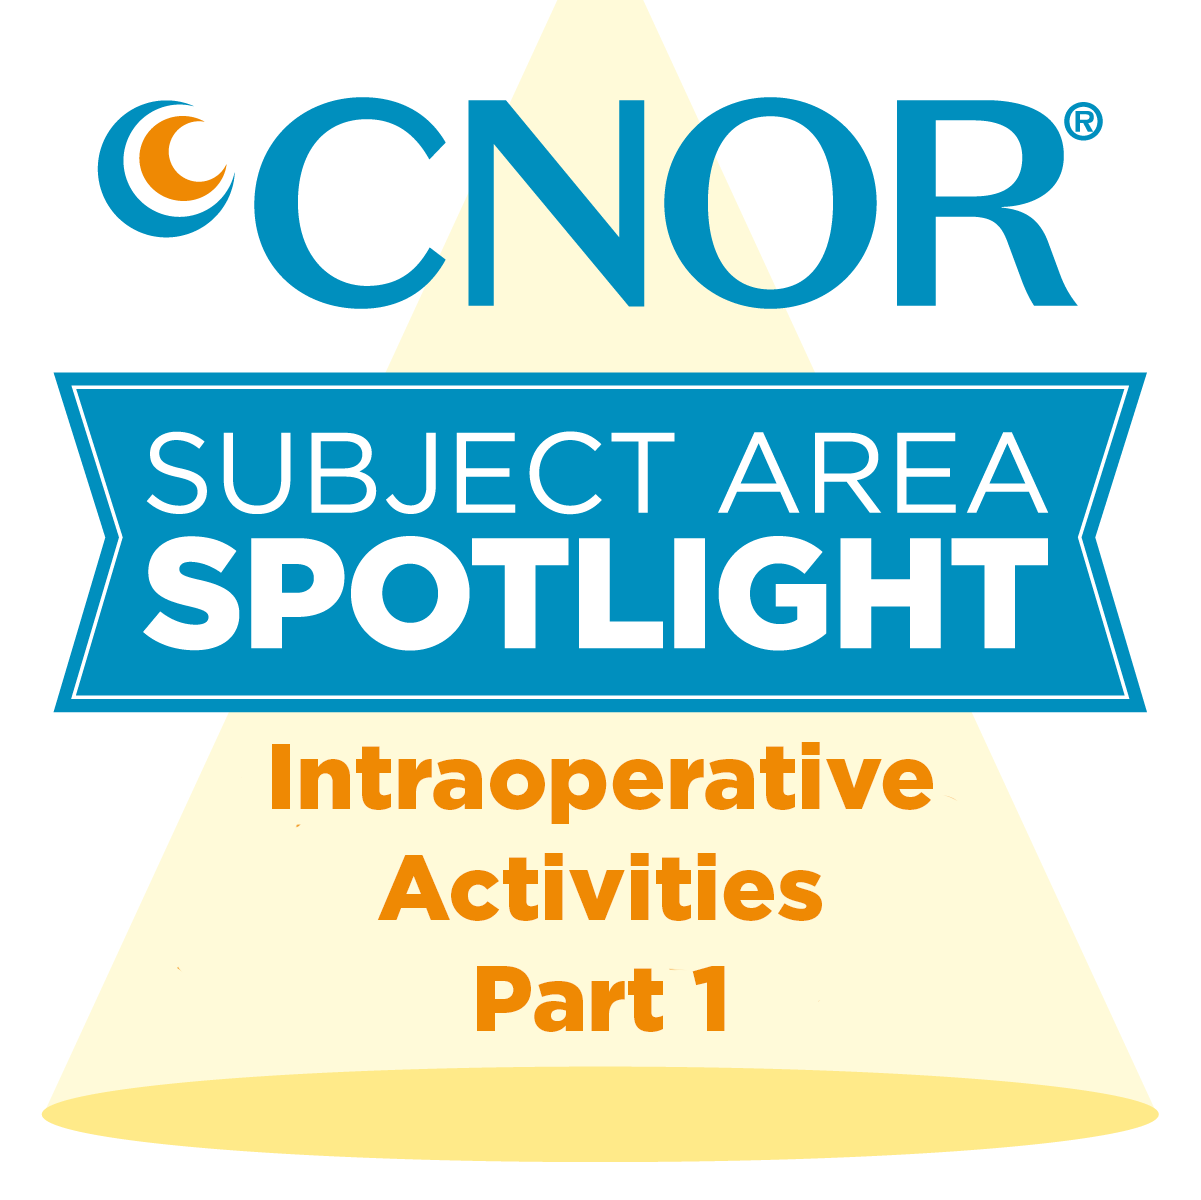 CNOR Subject Area Spotlight: Management of Intraoperative Activities Patient Care and Safety Part 1